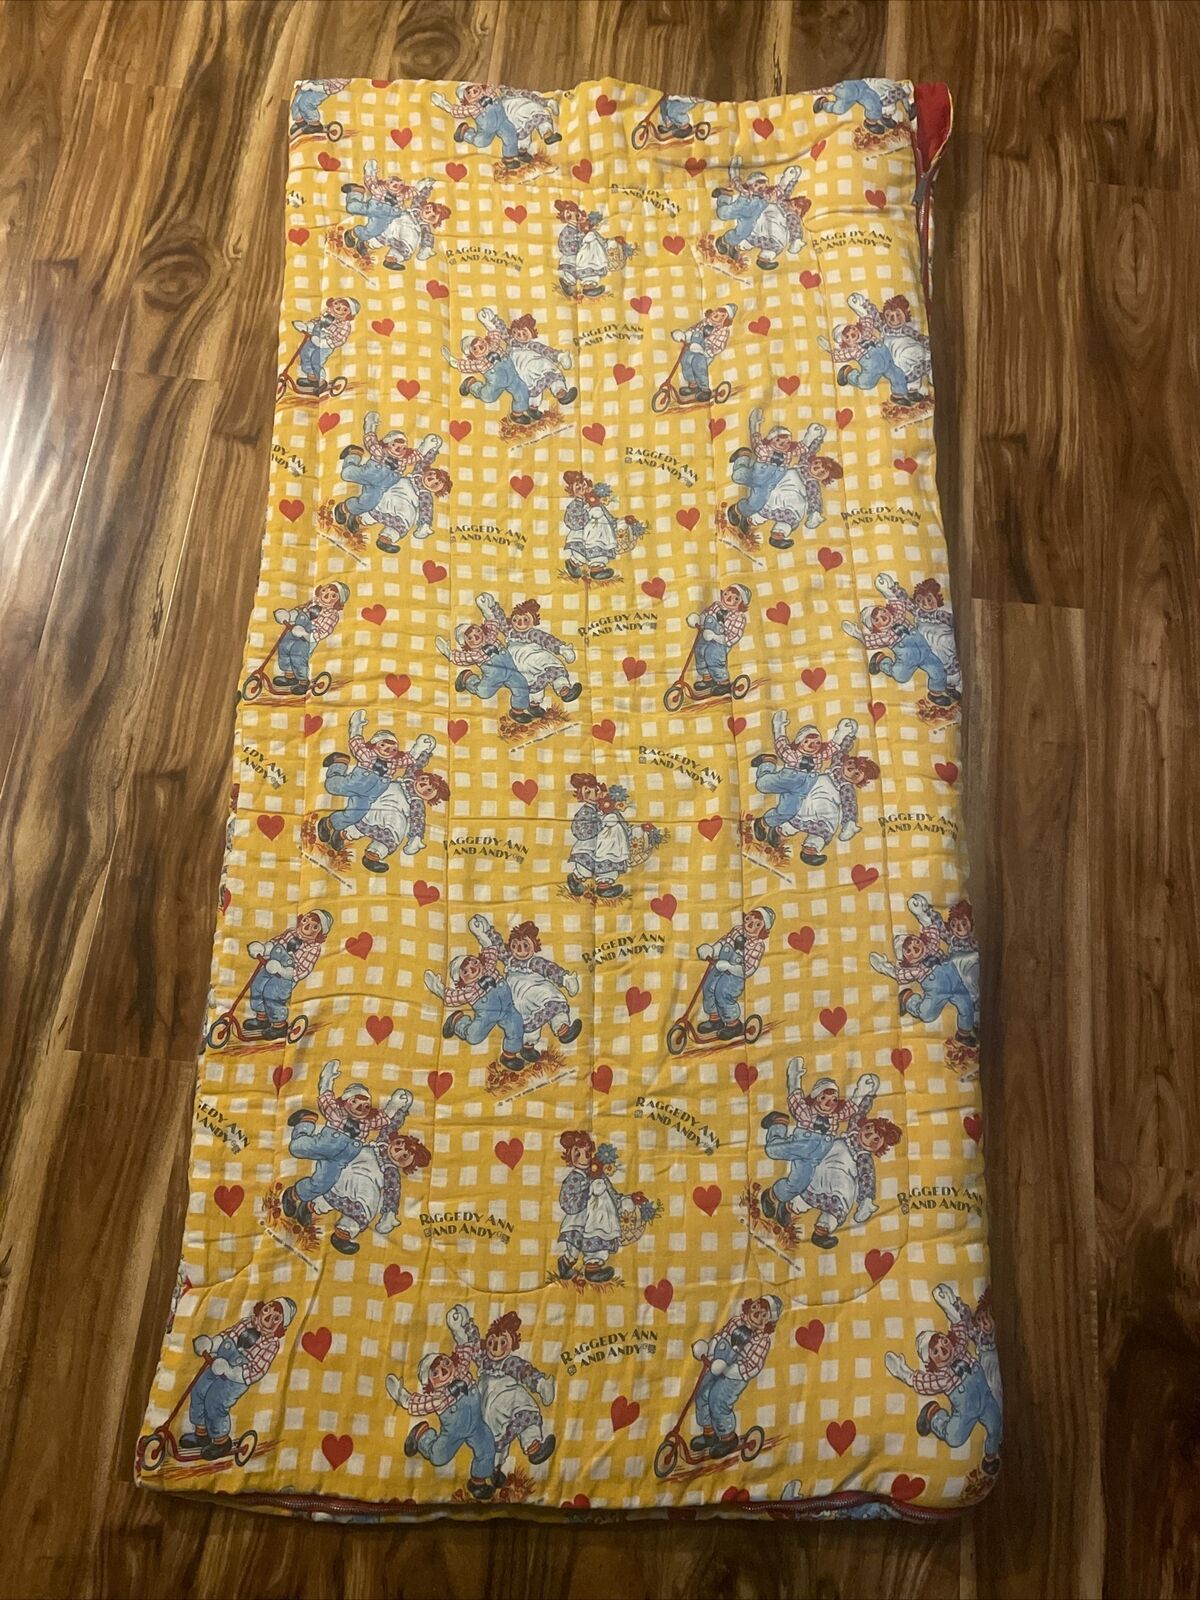 1975 Quilted 64”x32” Raggedy Ann & Andy Sleeping Bag Vintage